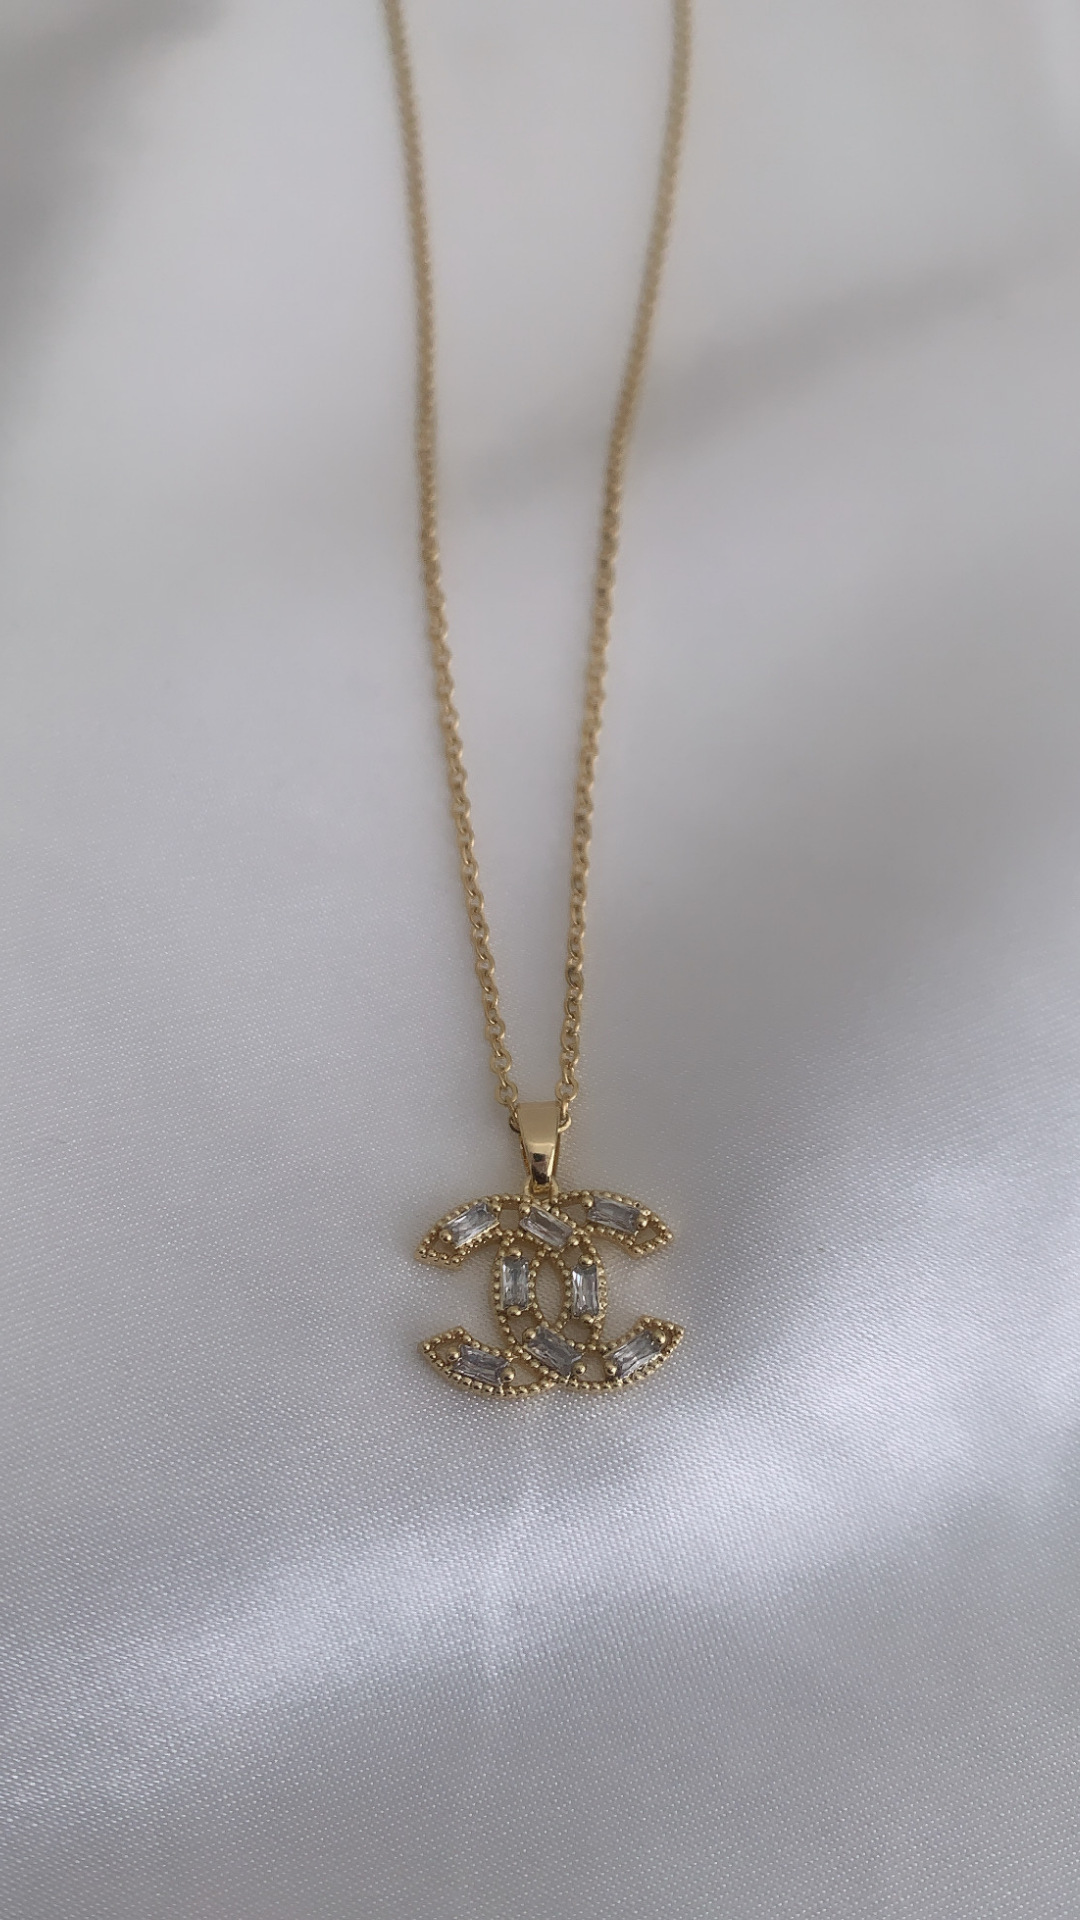 Chanel Double C Logo Crystal Necklace 24 Chain Circa 2015